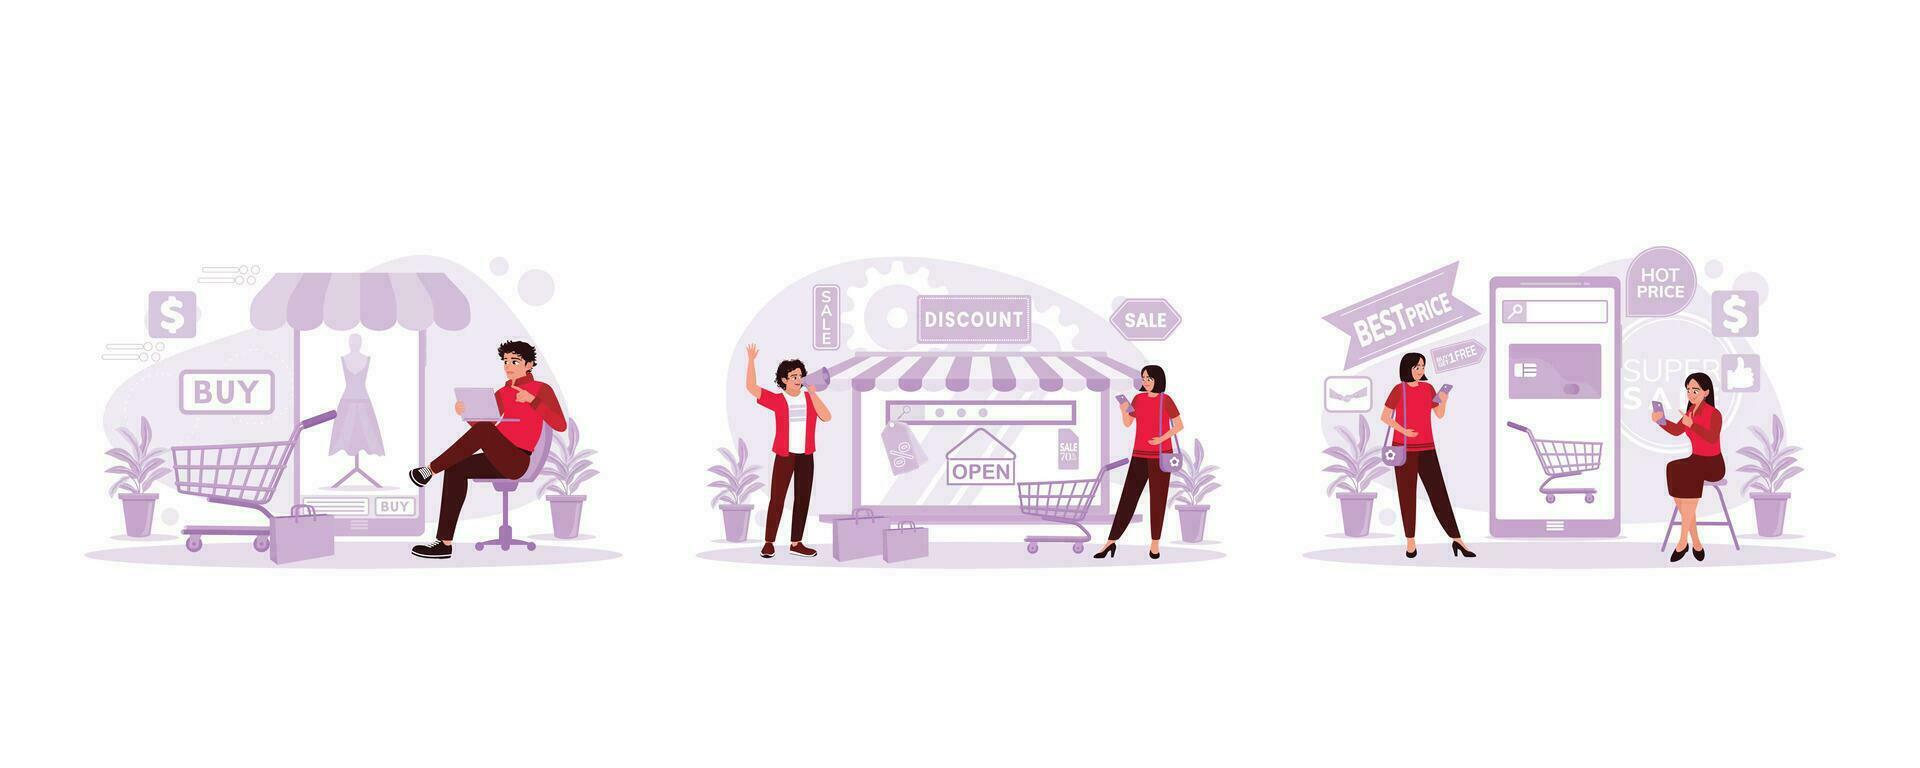 The youth sat back and opened the marketplace. Male salesperson doing promotion. Two women open an omni-channel business app. Trend Modern vector flat illustration.